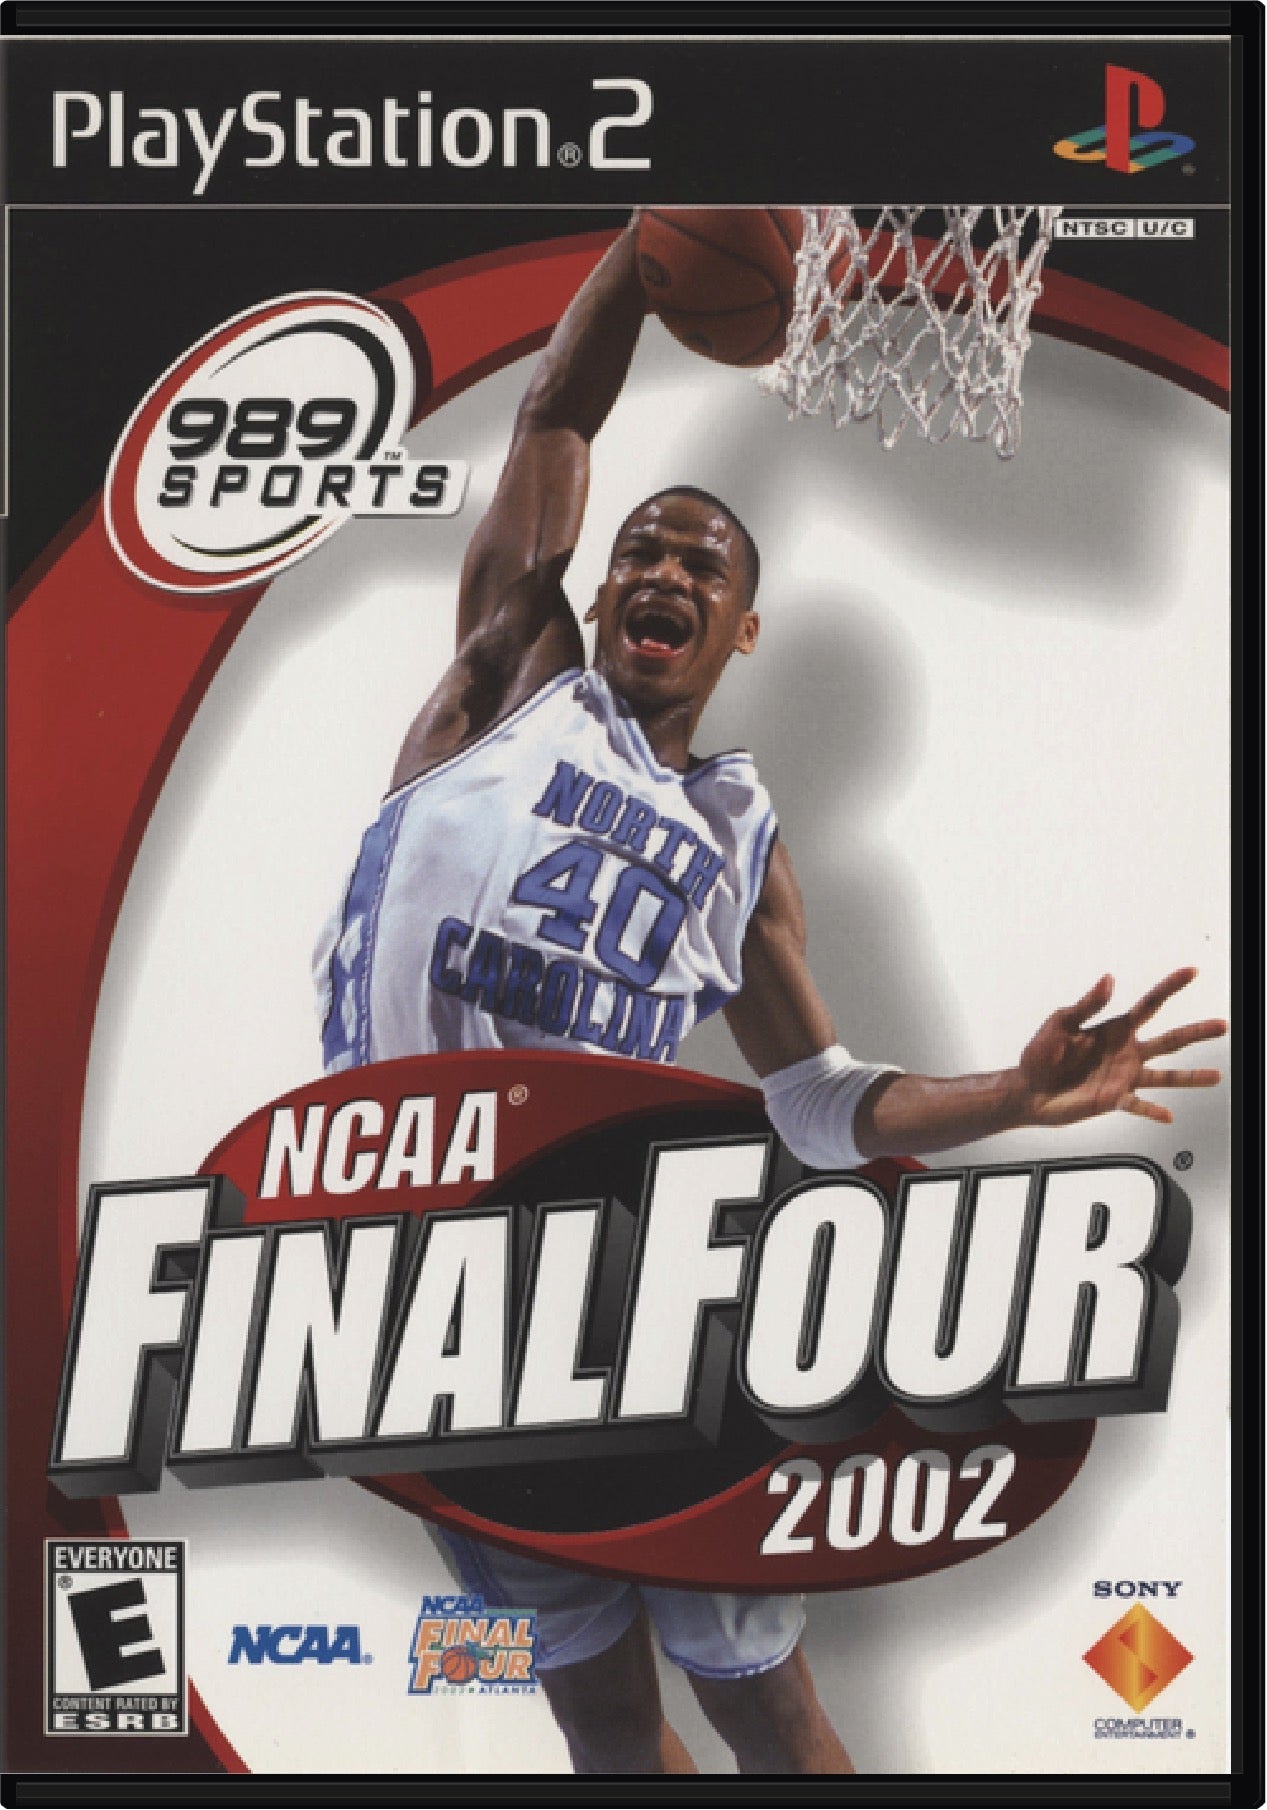 NCAA Final Four 2002 Cover Art and Product Photo